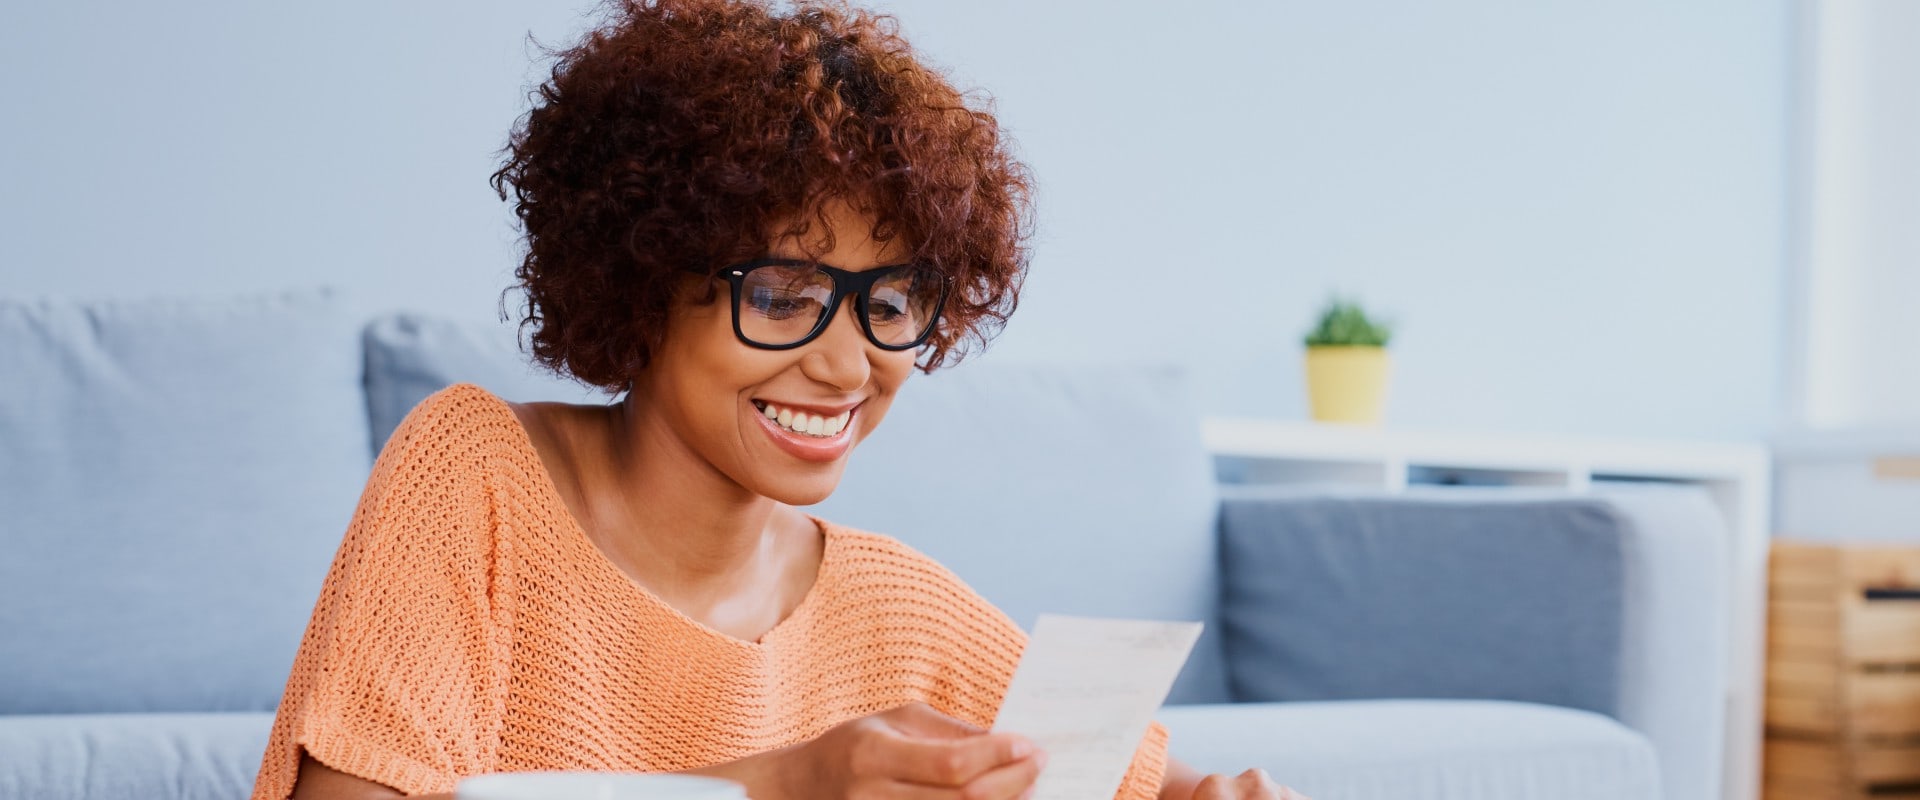 What Do You Need to Know About Applying for an Installment Loan?